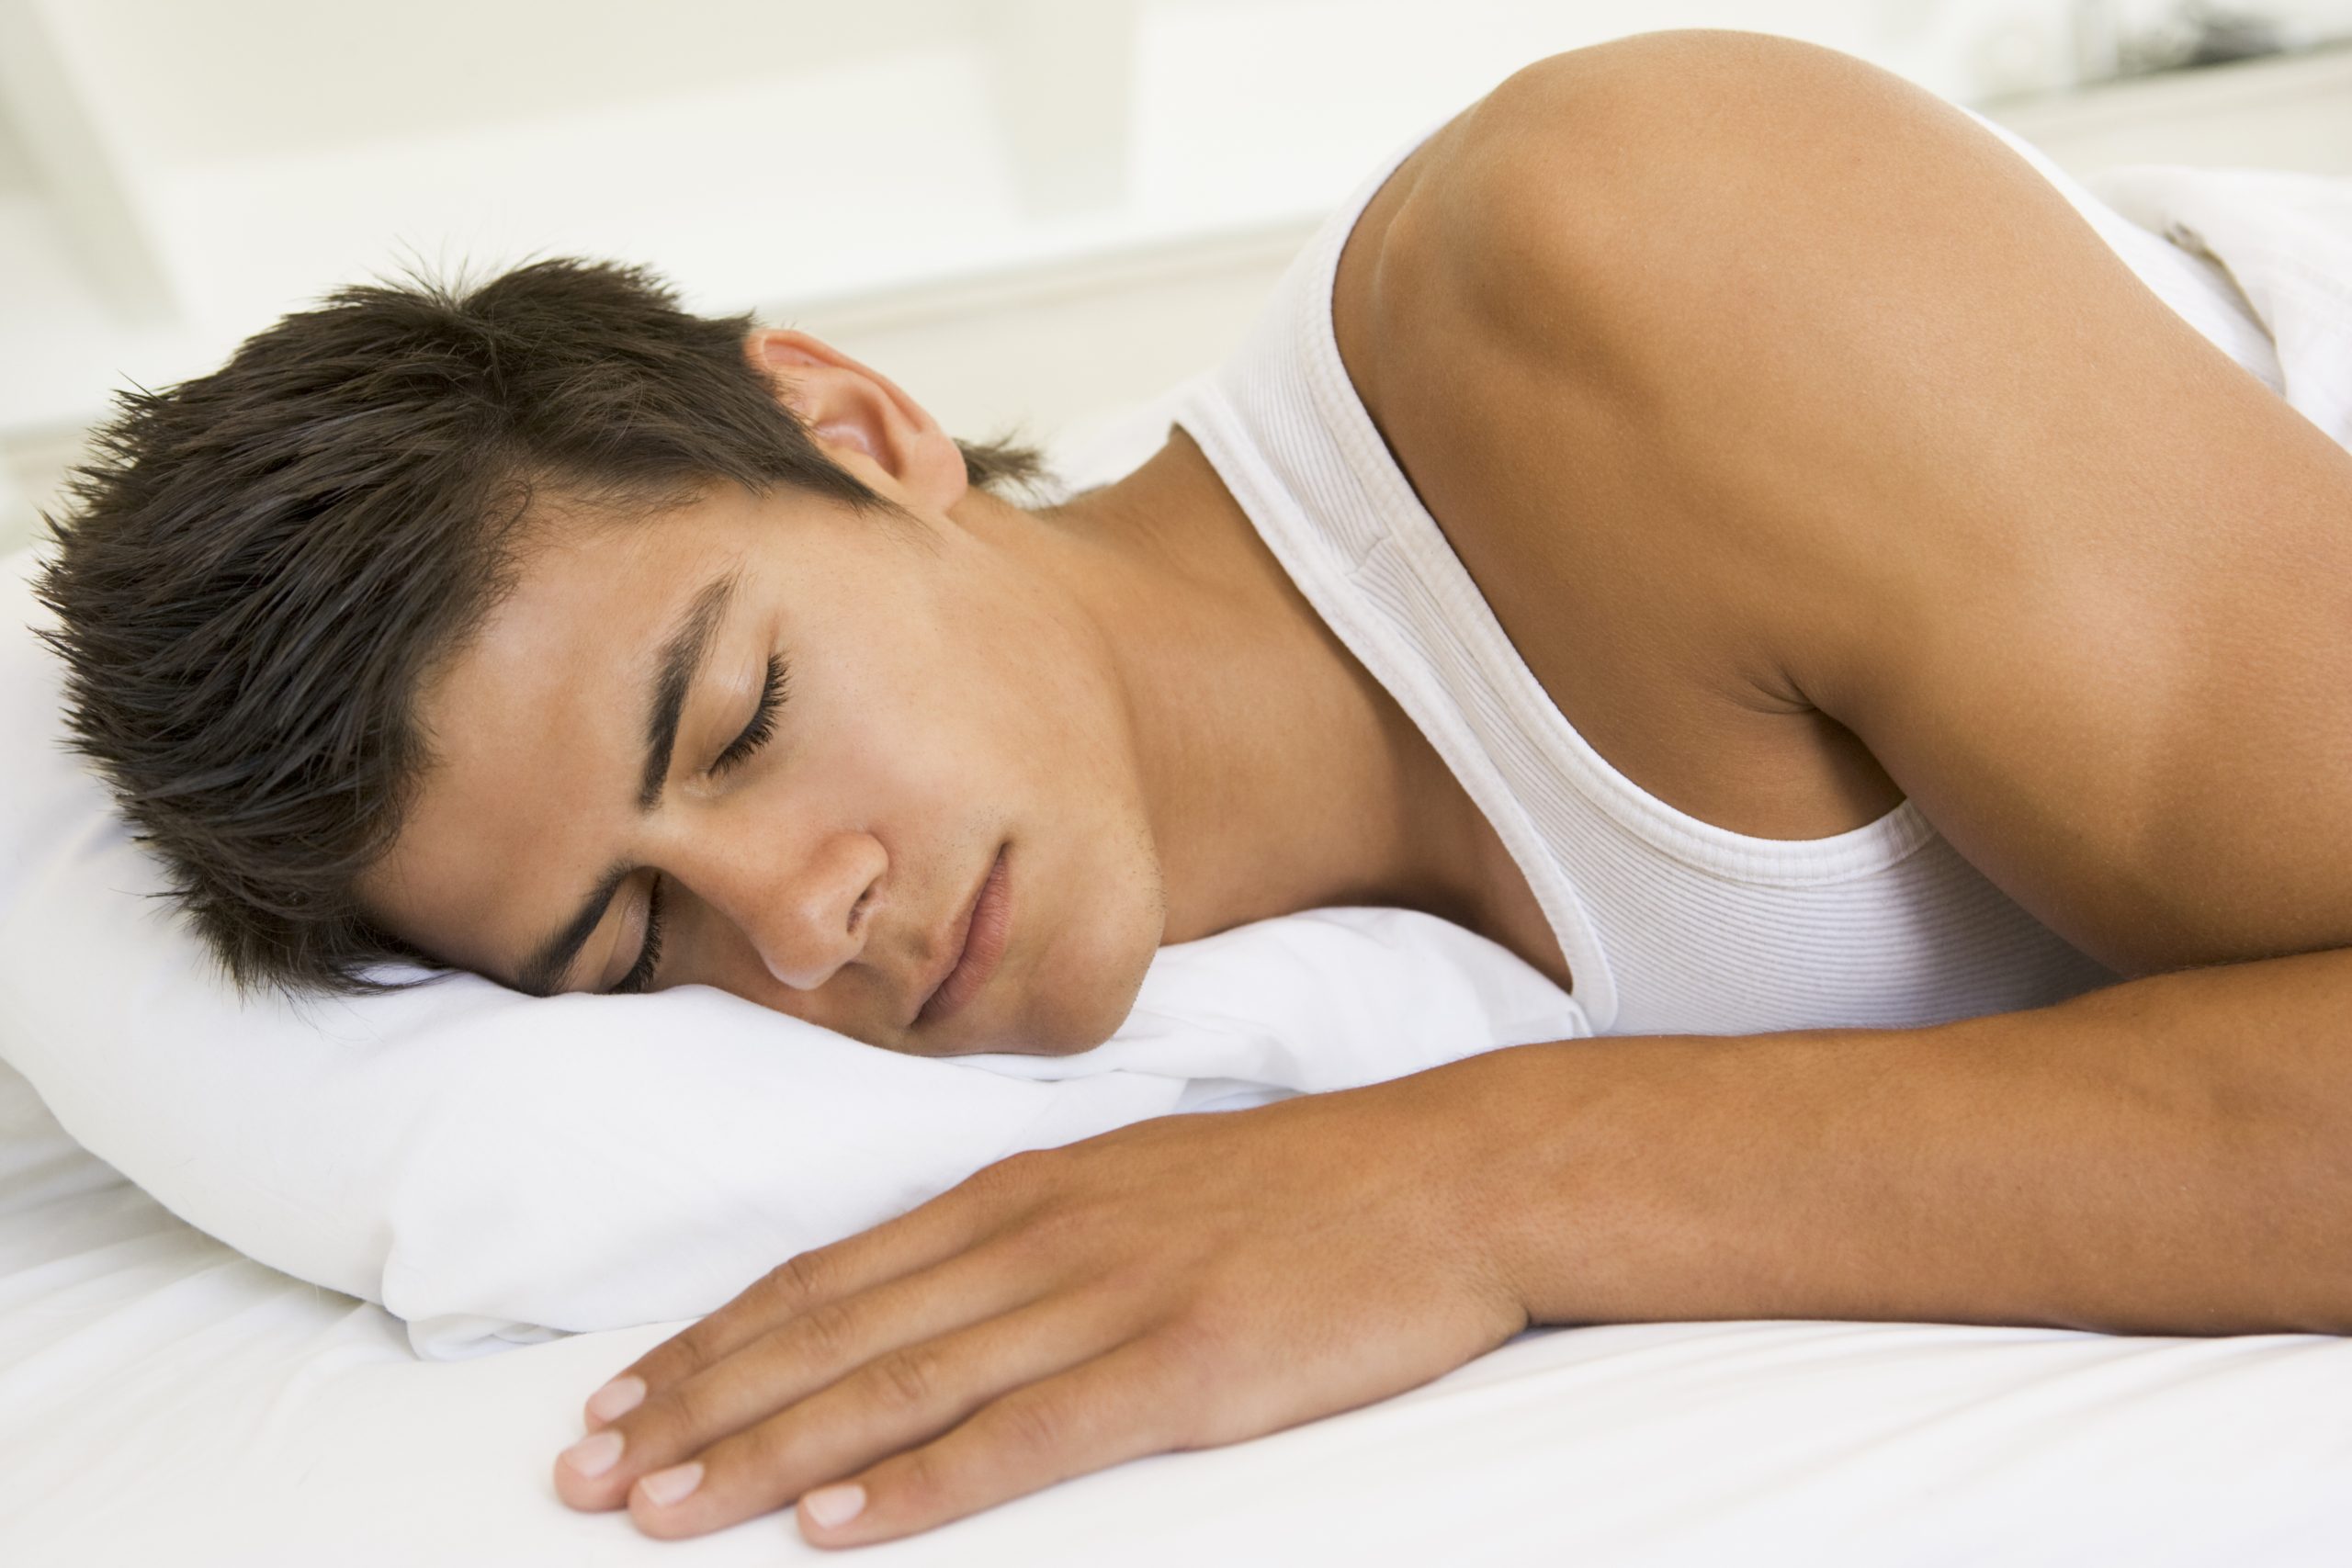 How to sleep on your back: Tips and benefits